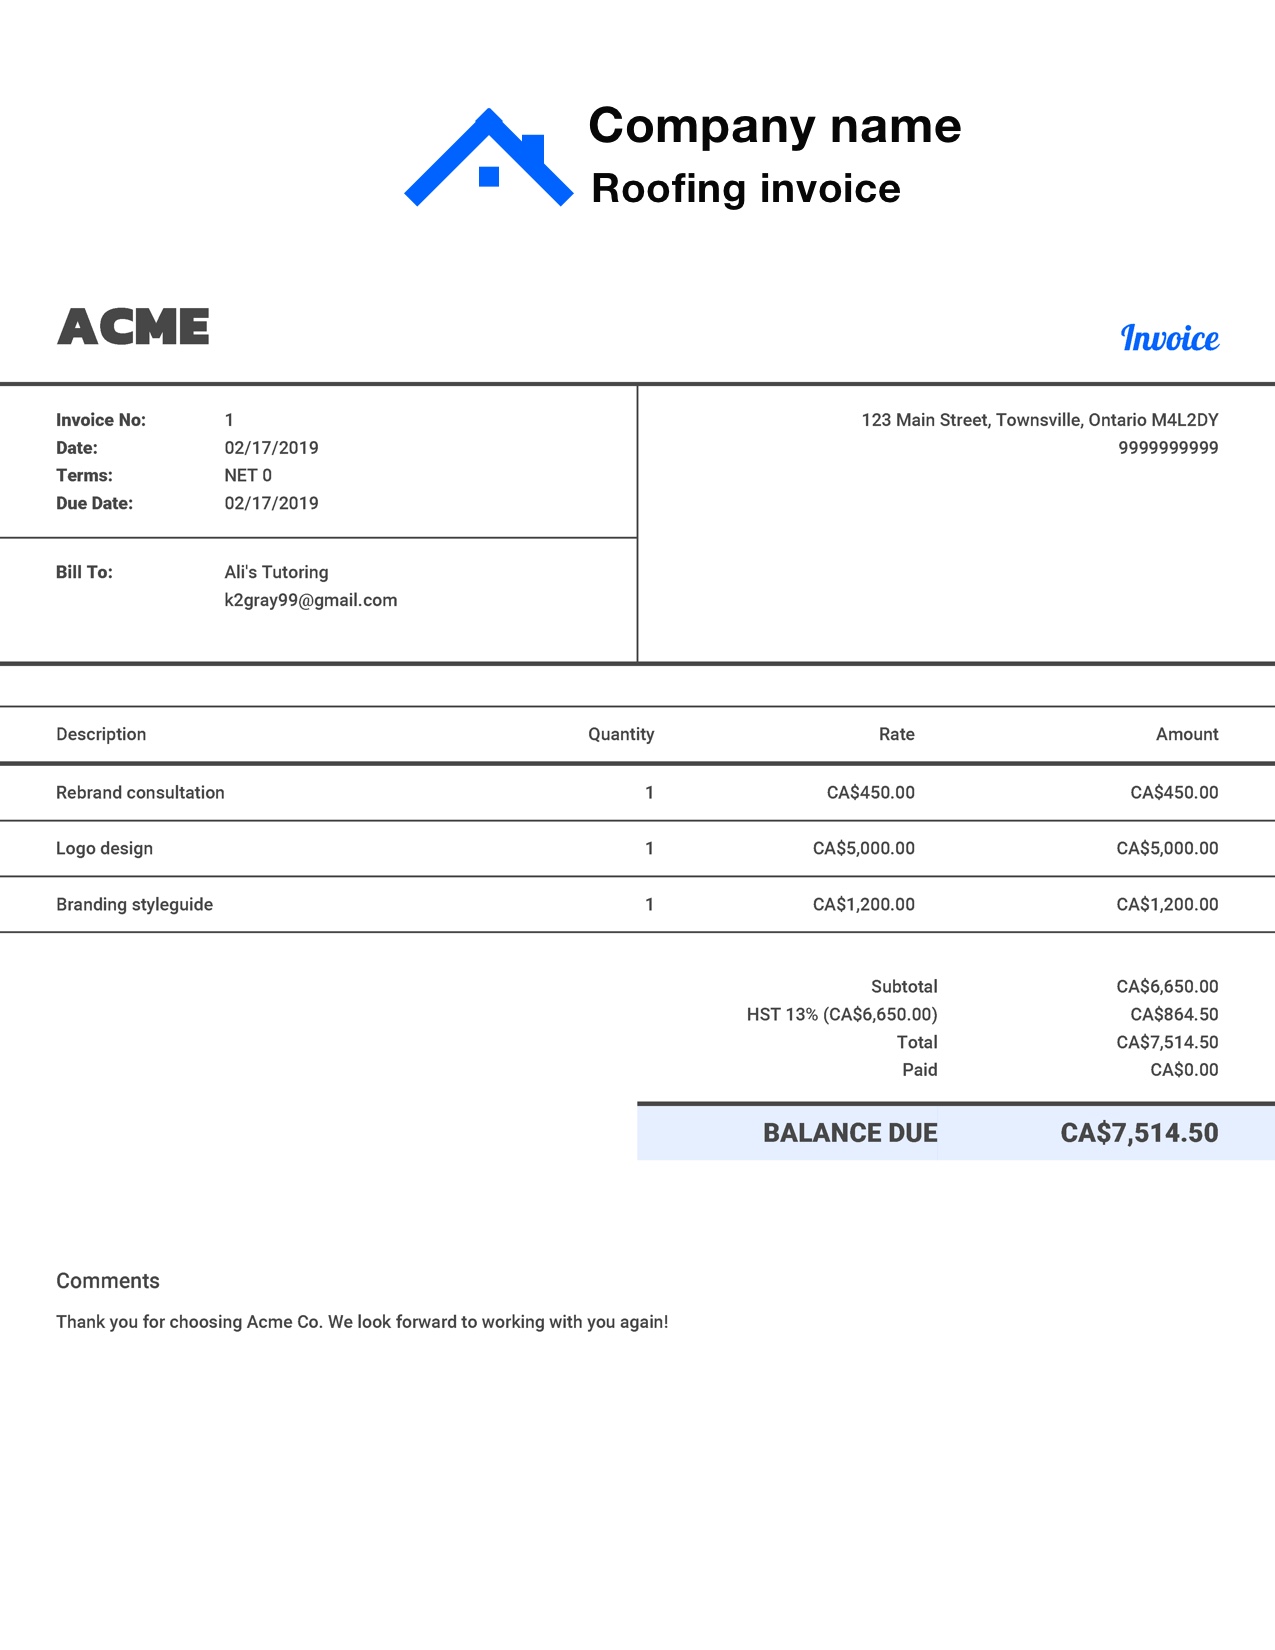 Free Roofing Invoice Template. Customize and Send in 21 Seconds With Free Roofing Invoice Template